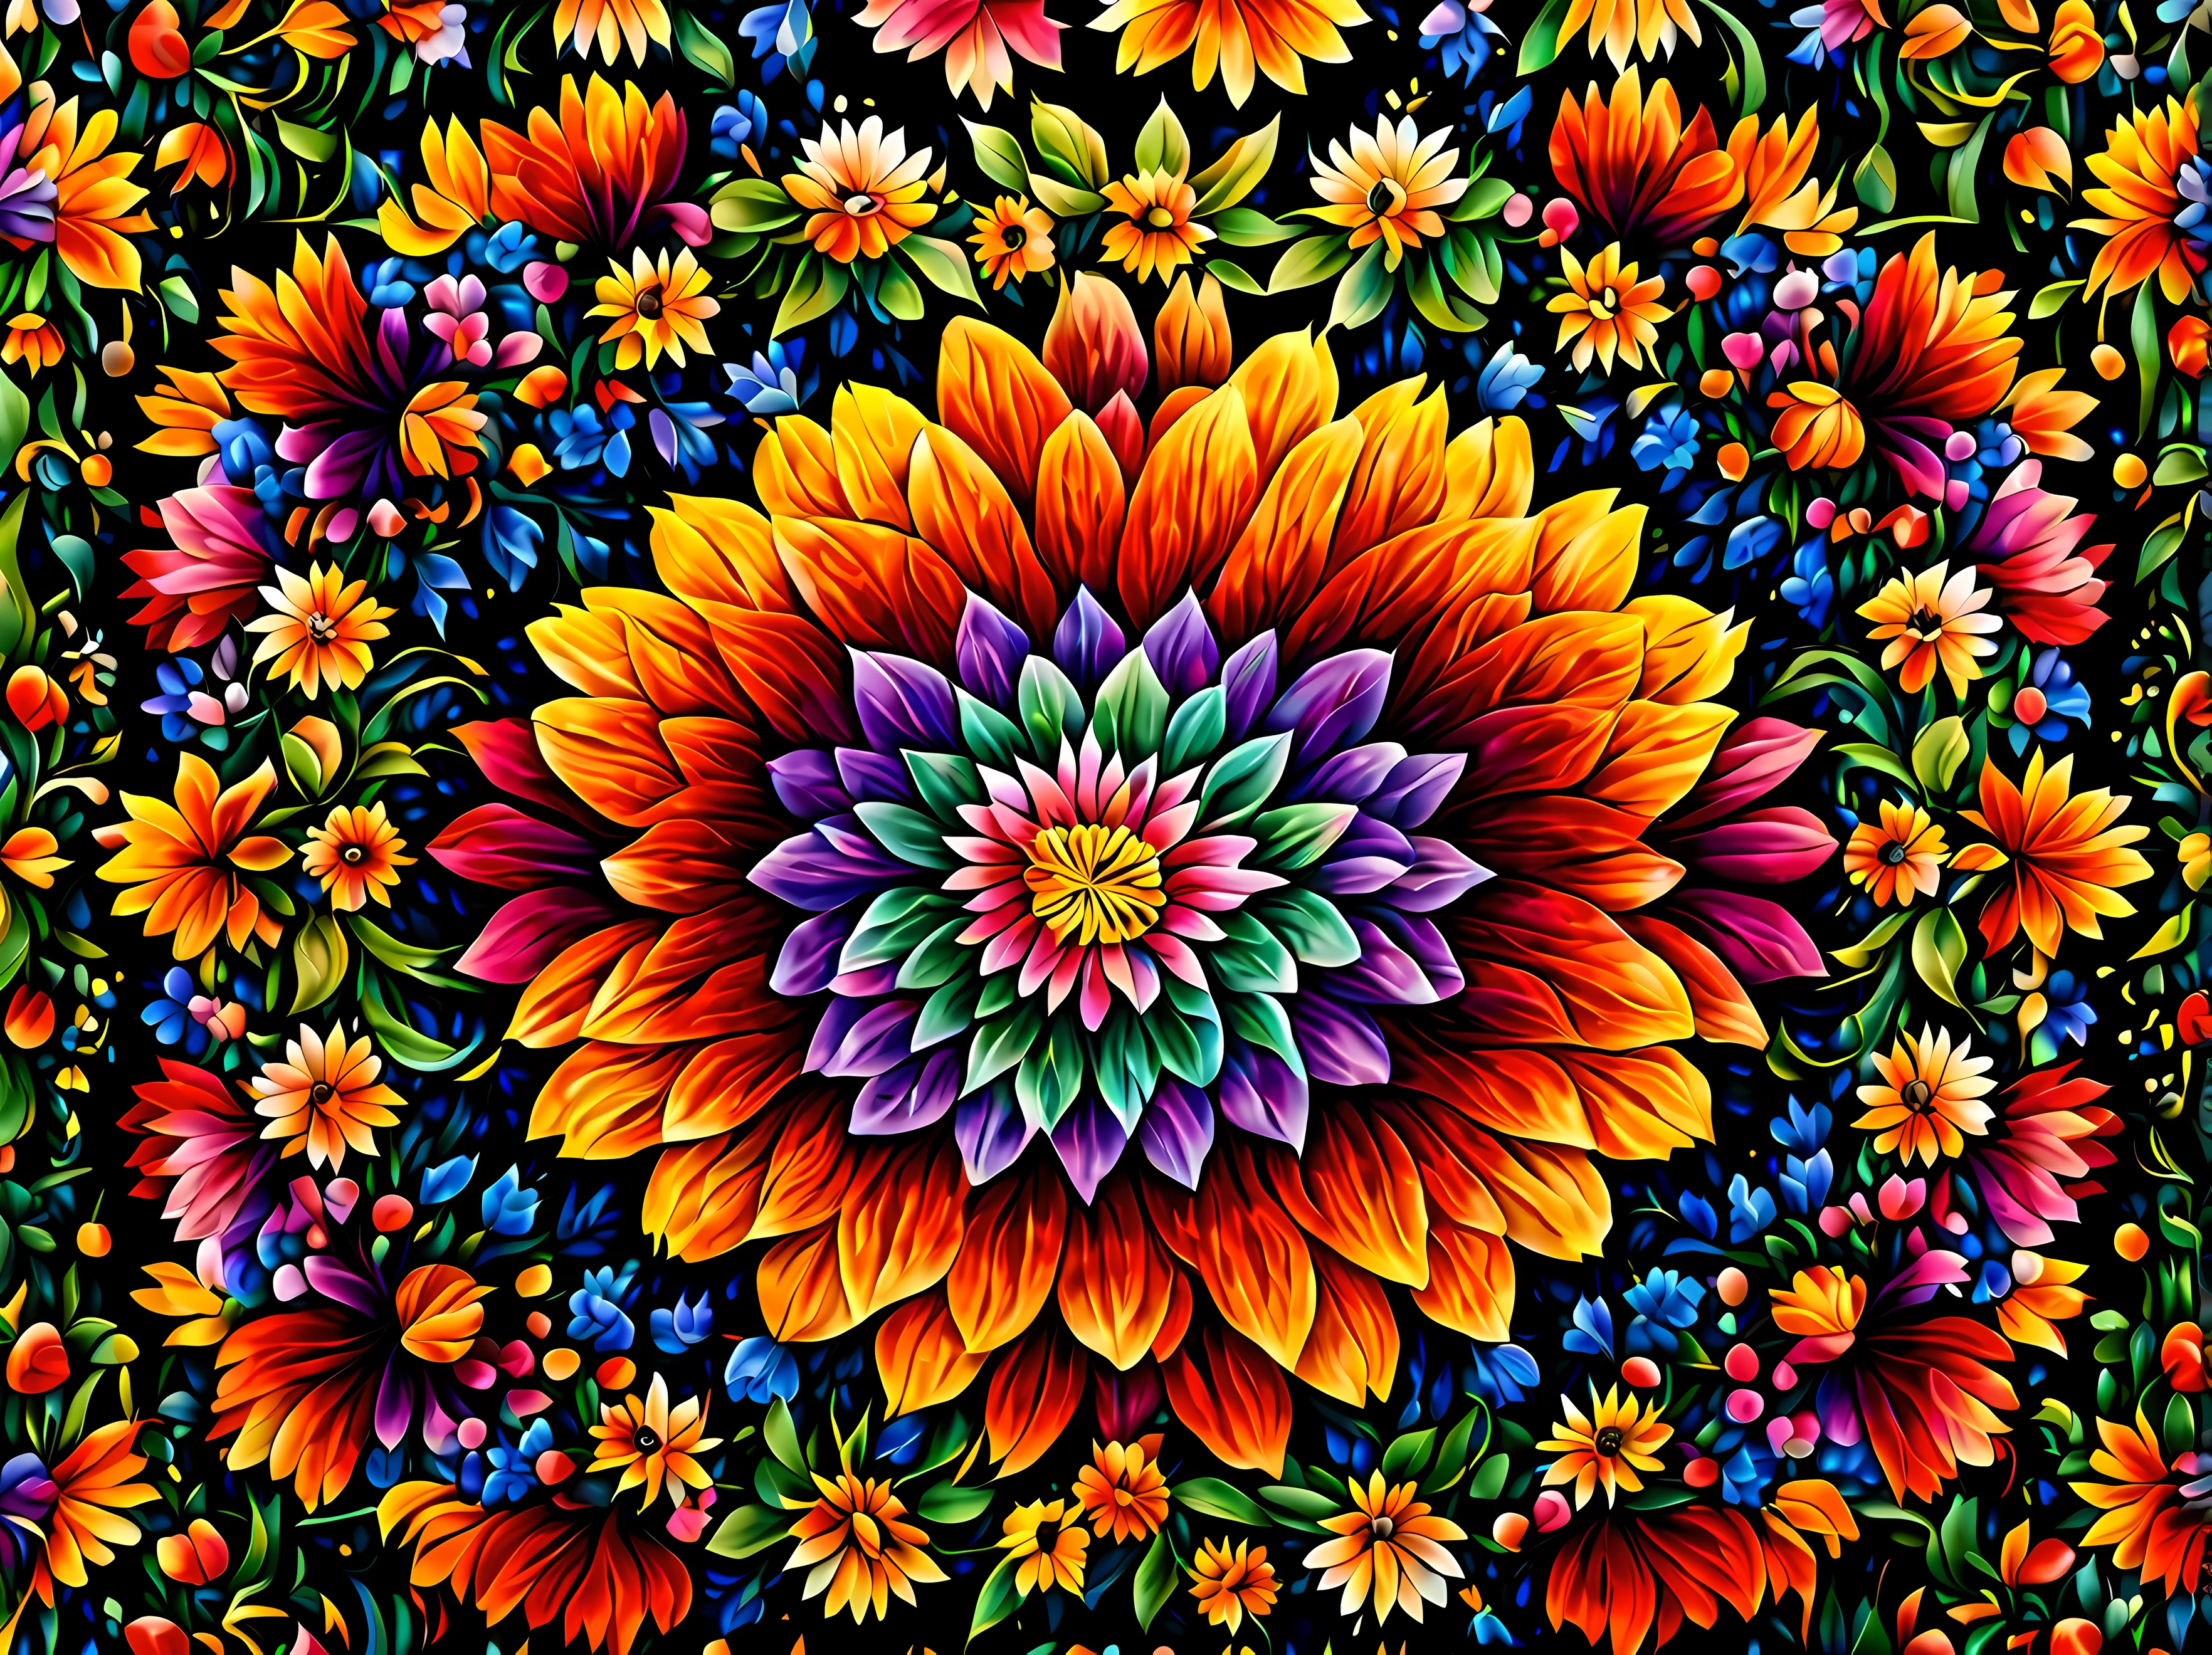 Design a visually captivating and harmoniouosaic))) artwork where ((flowers)) unfold in a mesmerizing display of colors and shapes, a tapestry of intricate patterns and textures, vibrant hues swirling and intermingling, a sense of wonder and enchantment, masterpiece in maximum 16K resolution, superb quality. | ((More_Detail))